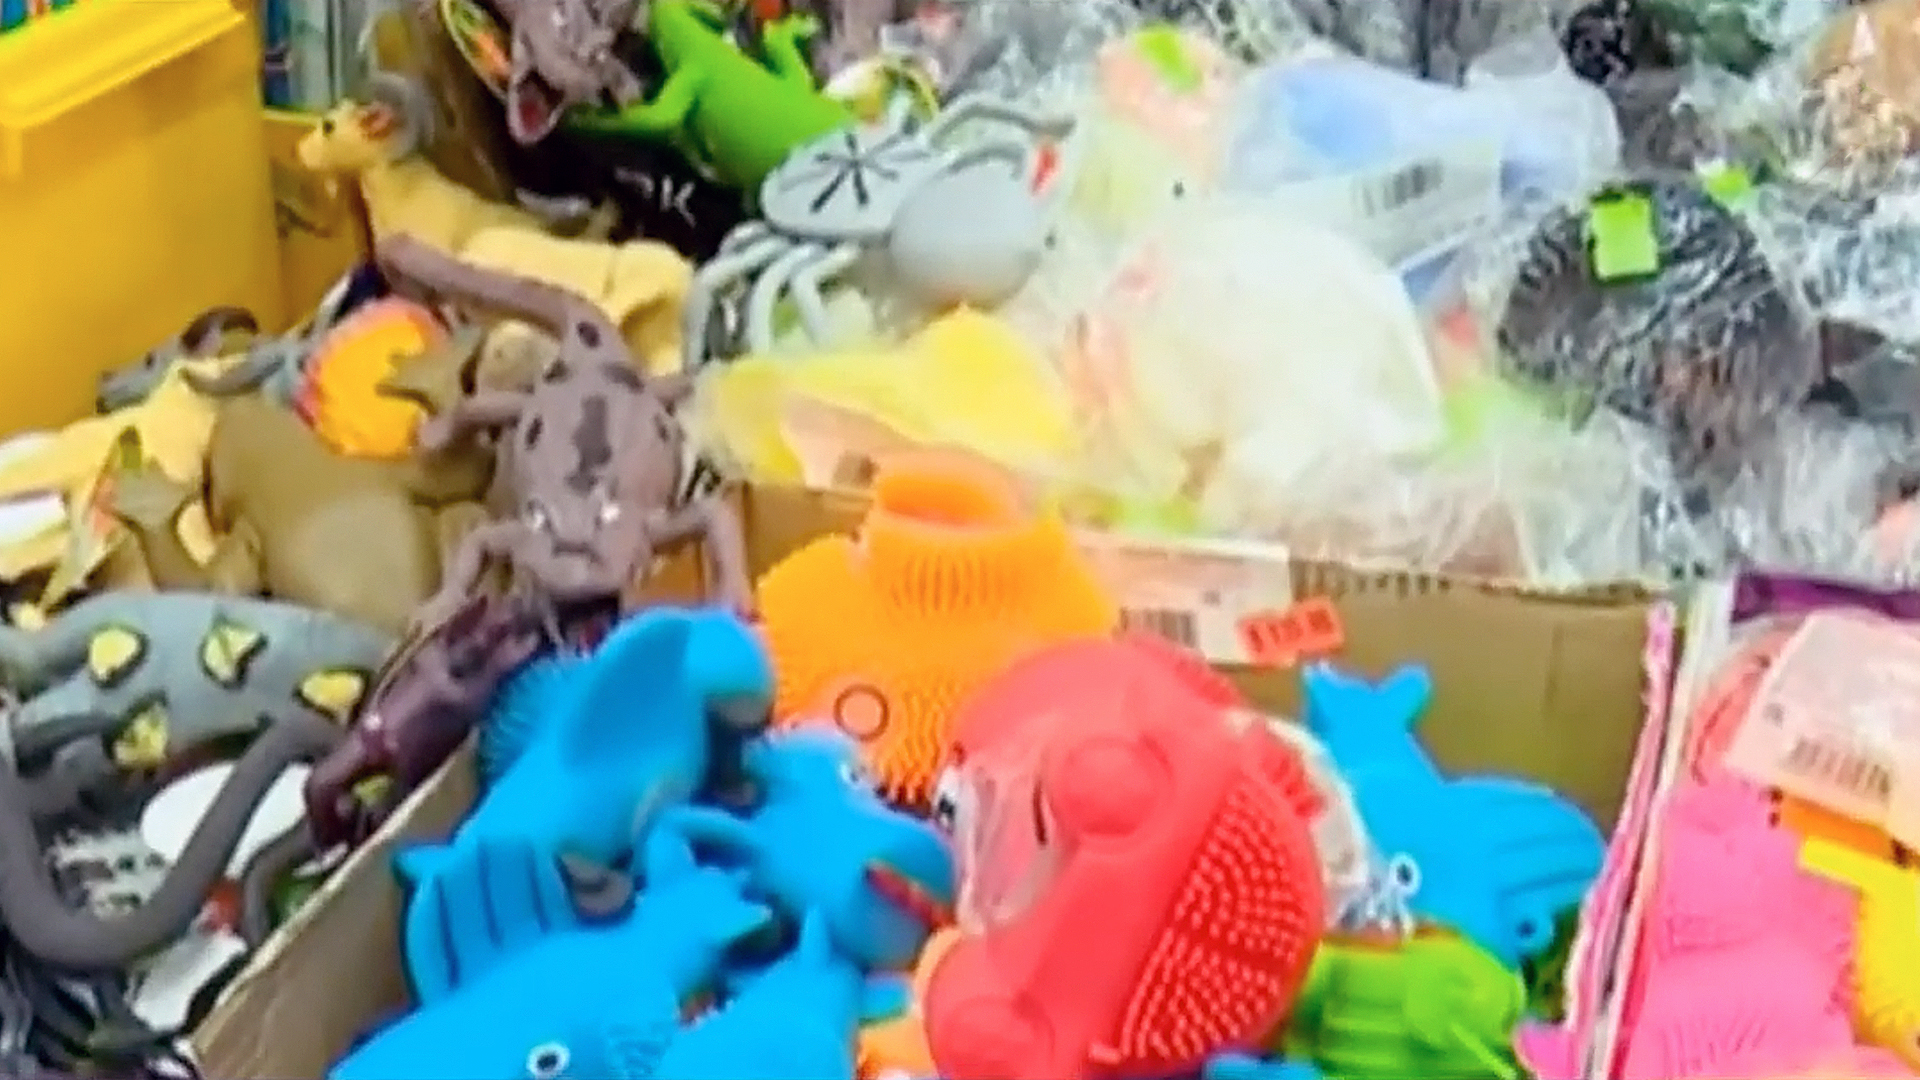 Counterfeit toys from China - Safety, Control, Products, Violation, Quality, Society, Children, Video, Longpost